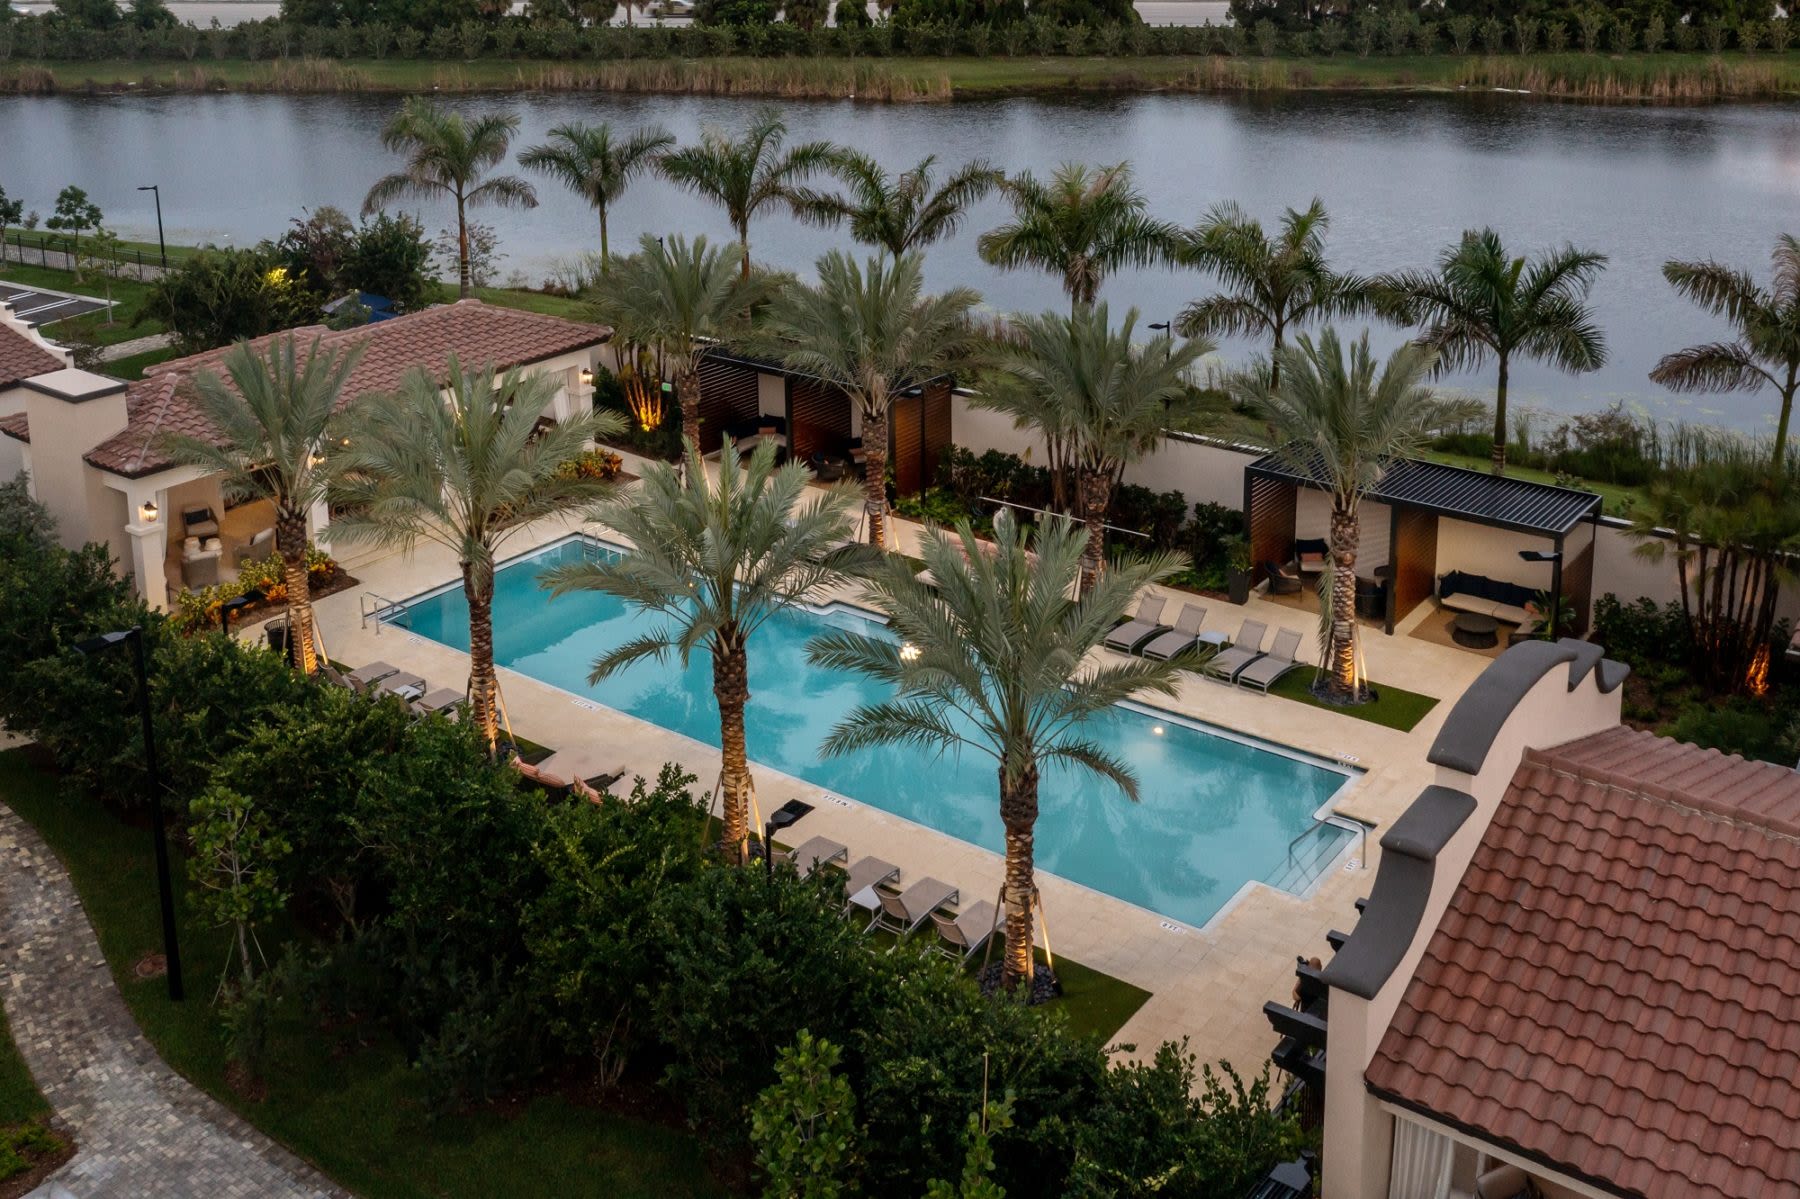 Resort-style pool with palm trees, loungers, clubhouse at Locklyn West Palm, West Palm Beach, Florida